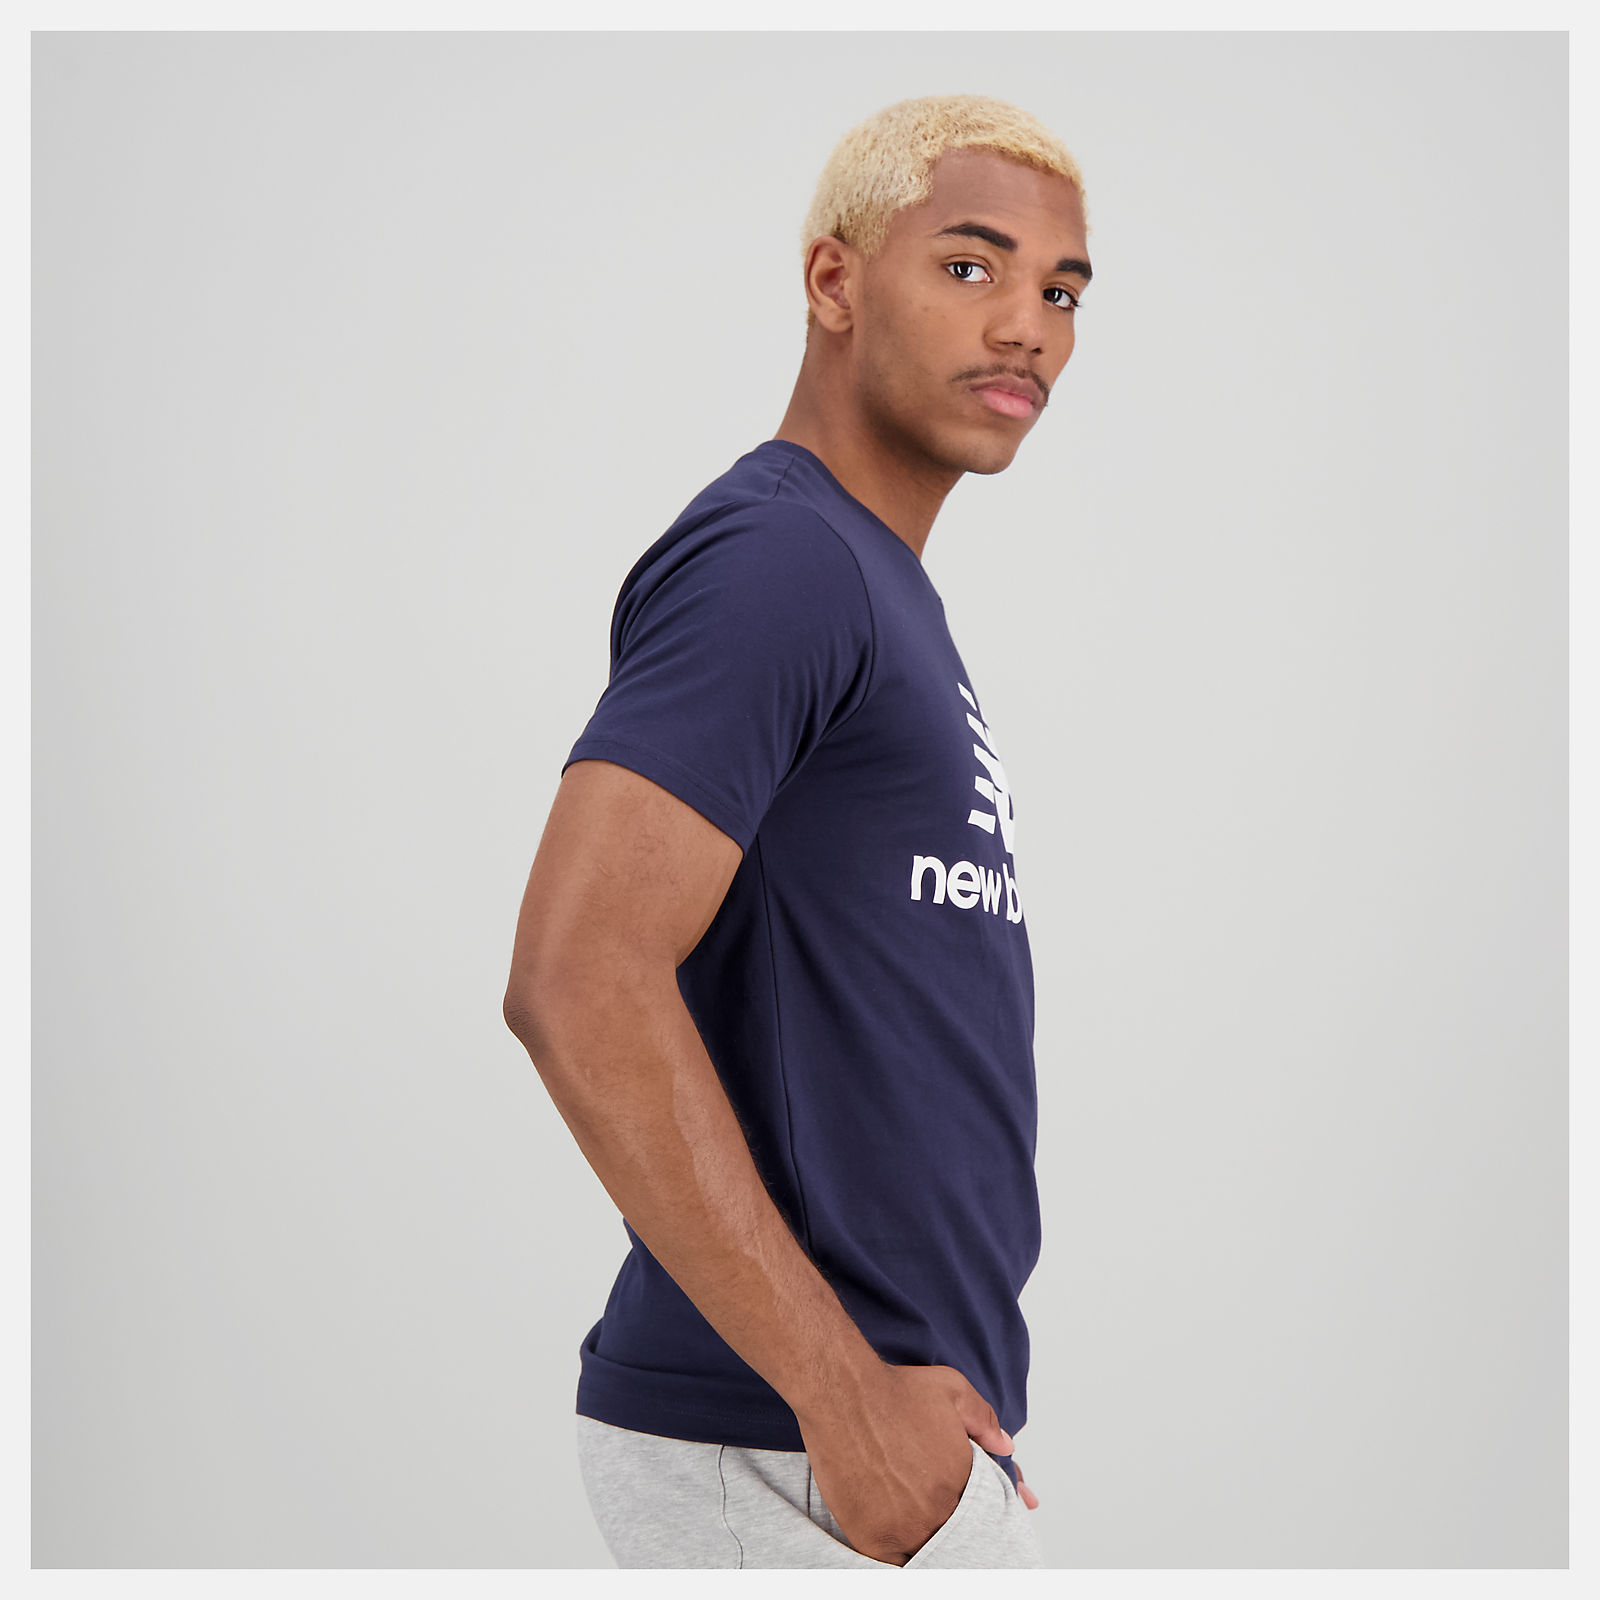 NB Essentials Stacked Logo Tee - Joe's New Balance Outlet